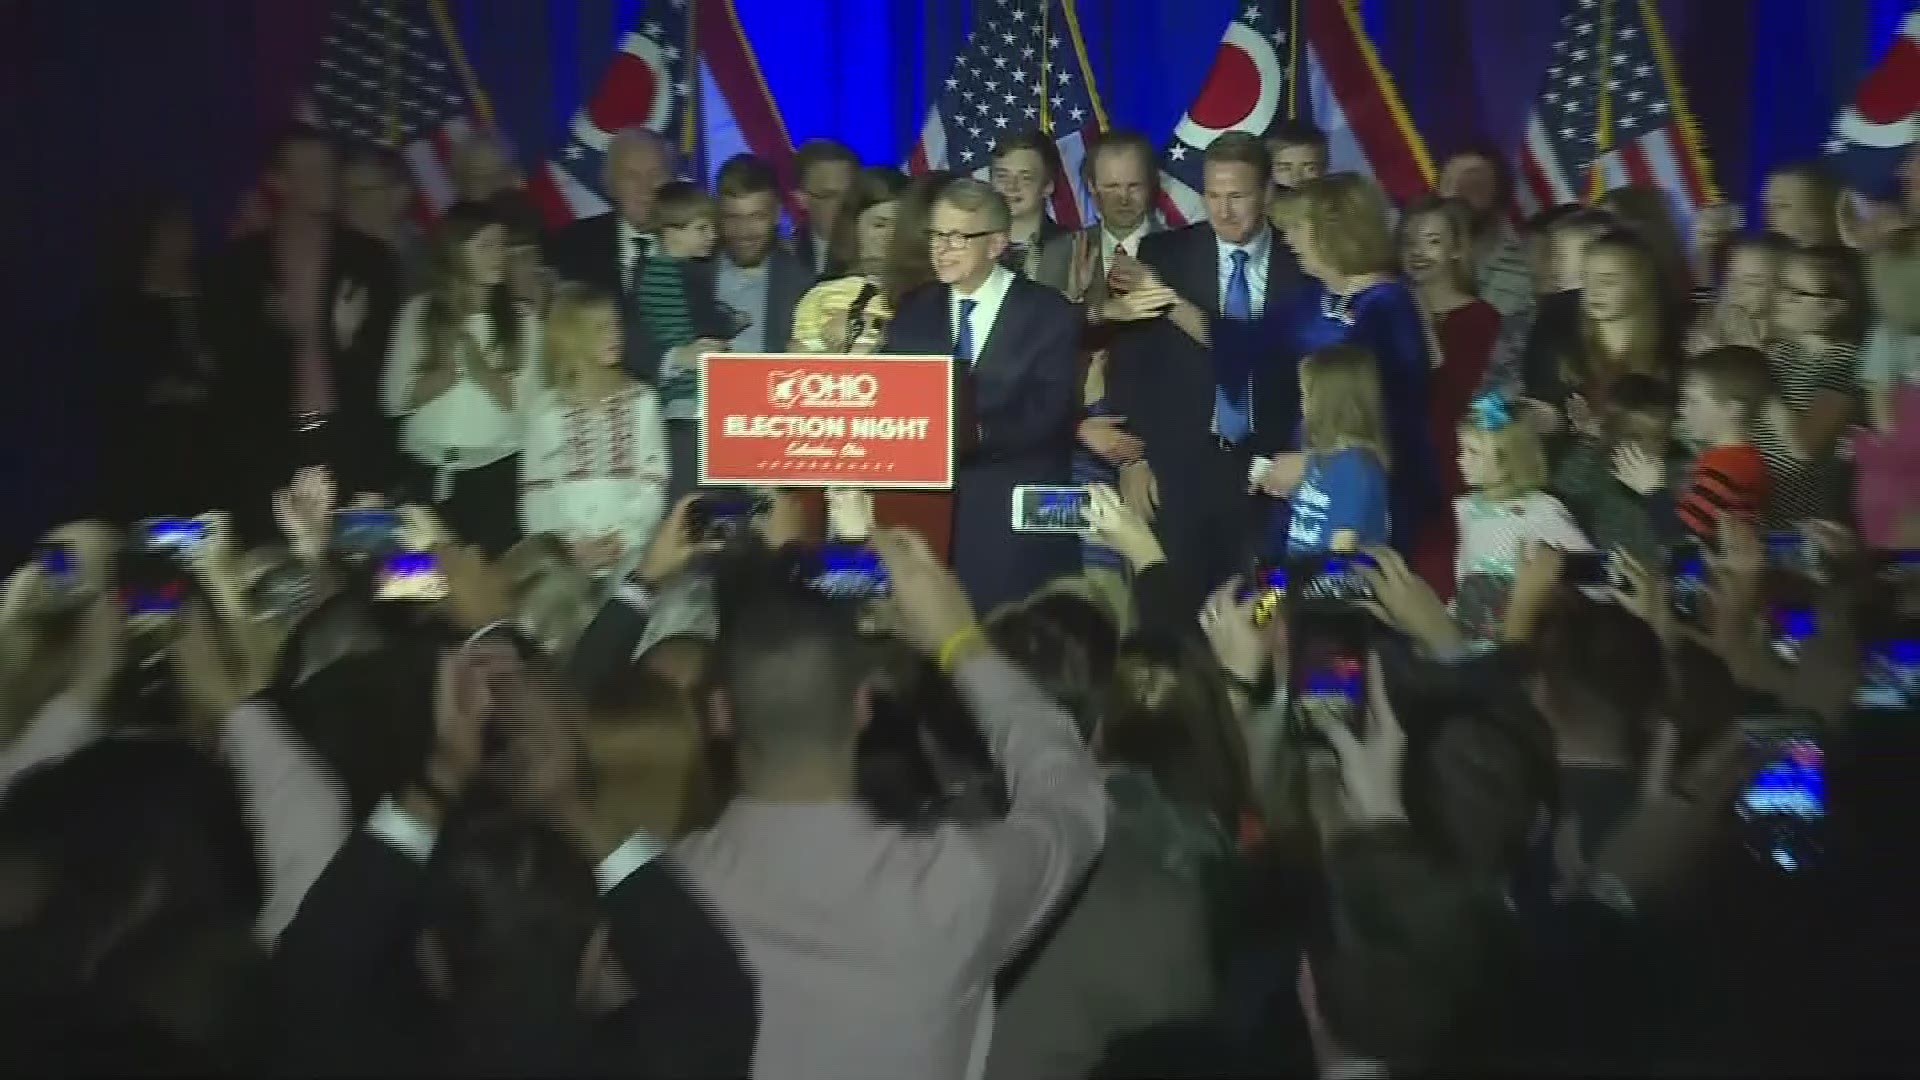 Mike DeWine gives acceptance speech after being elected Ohio governor